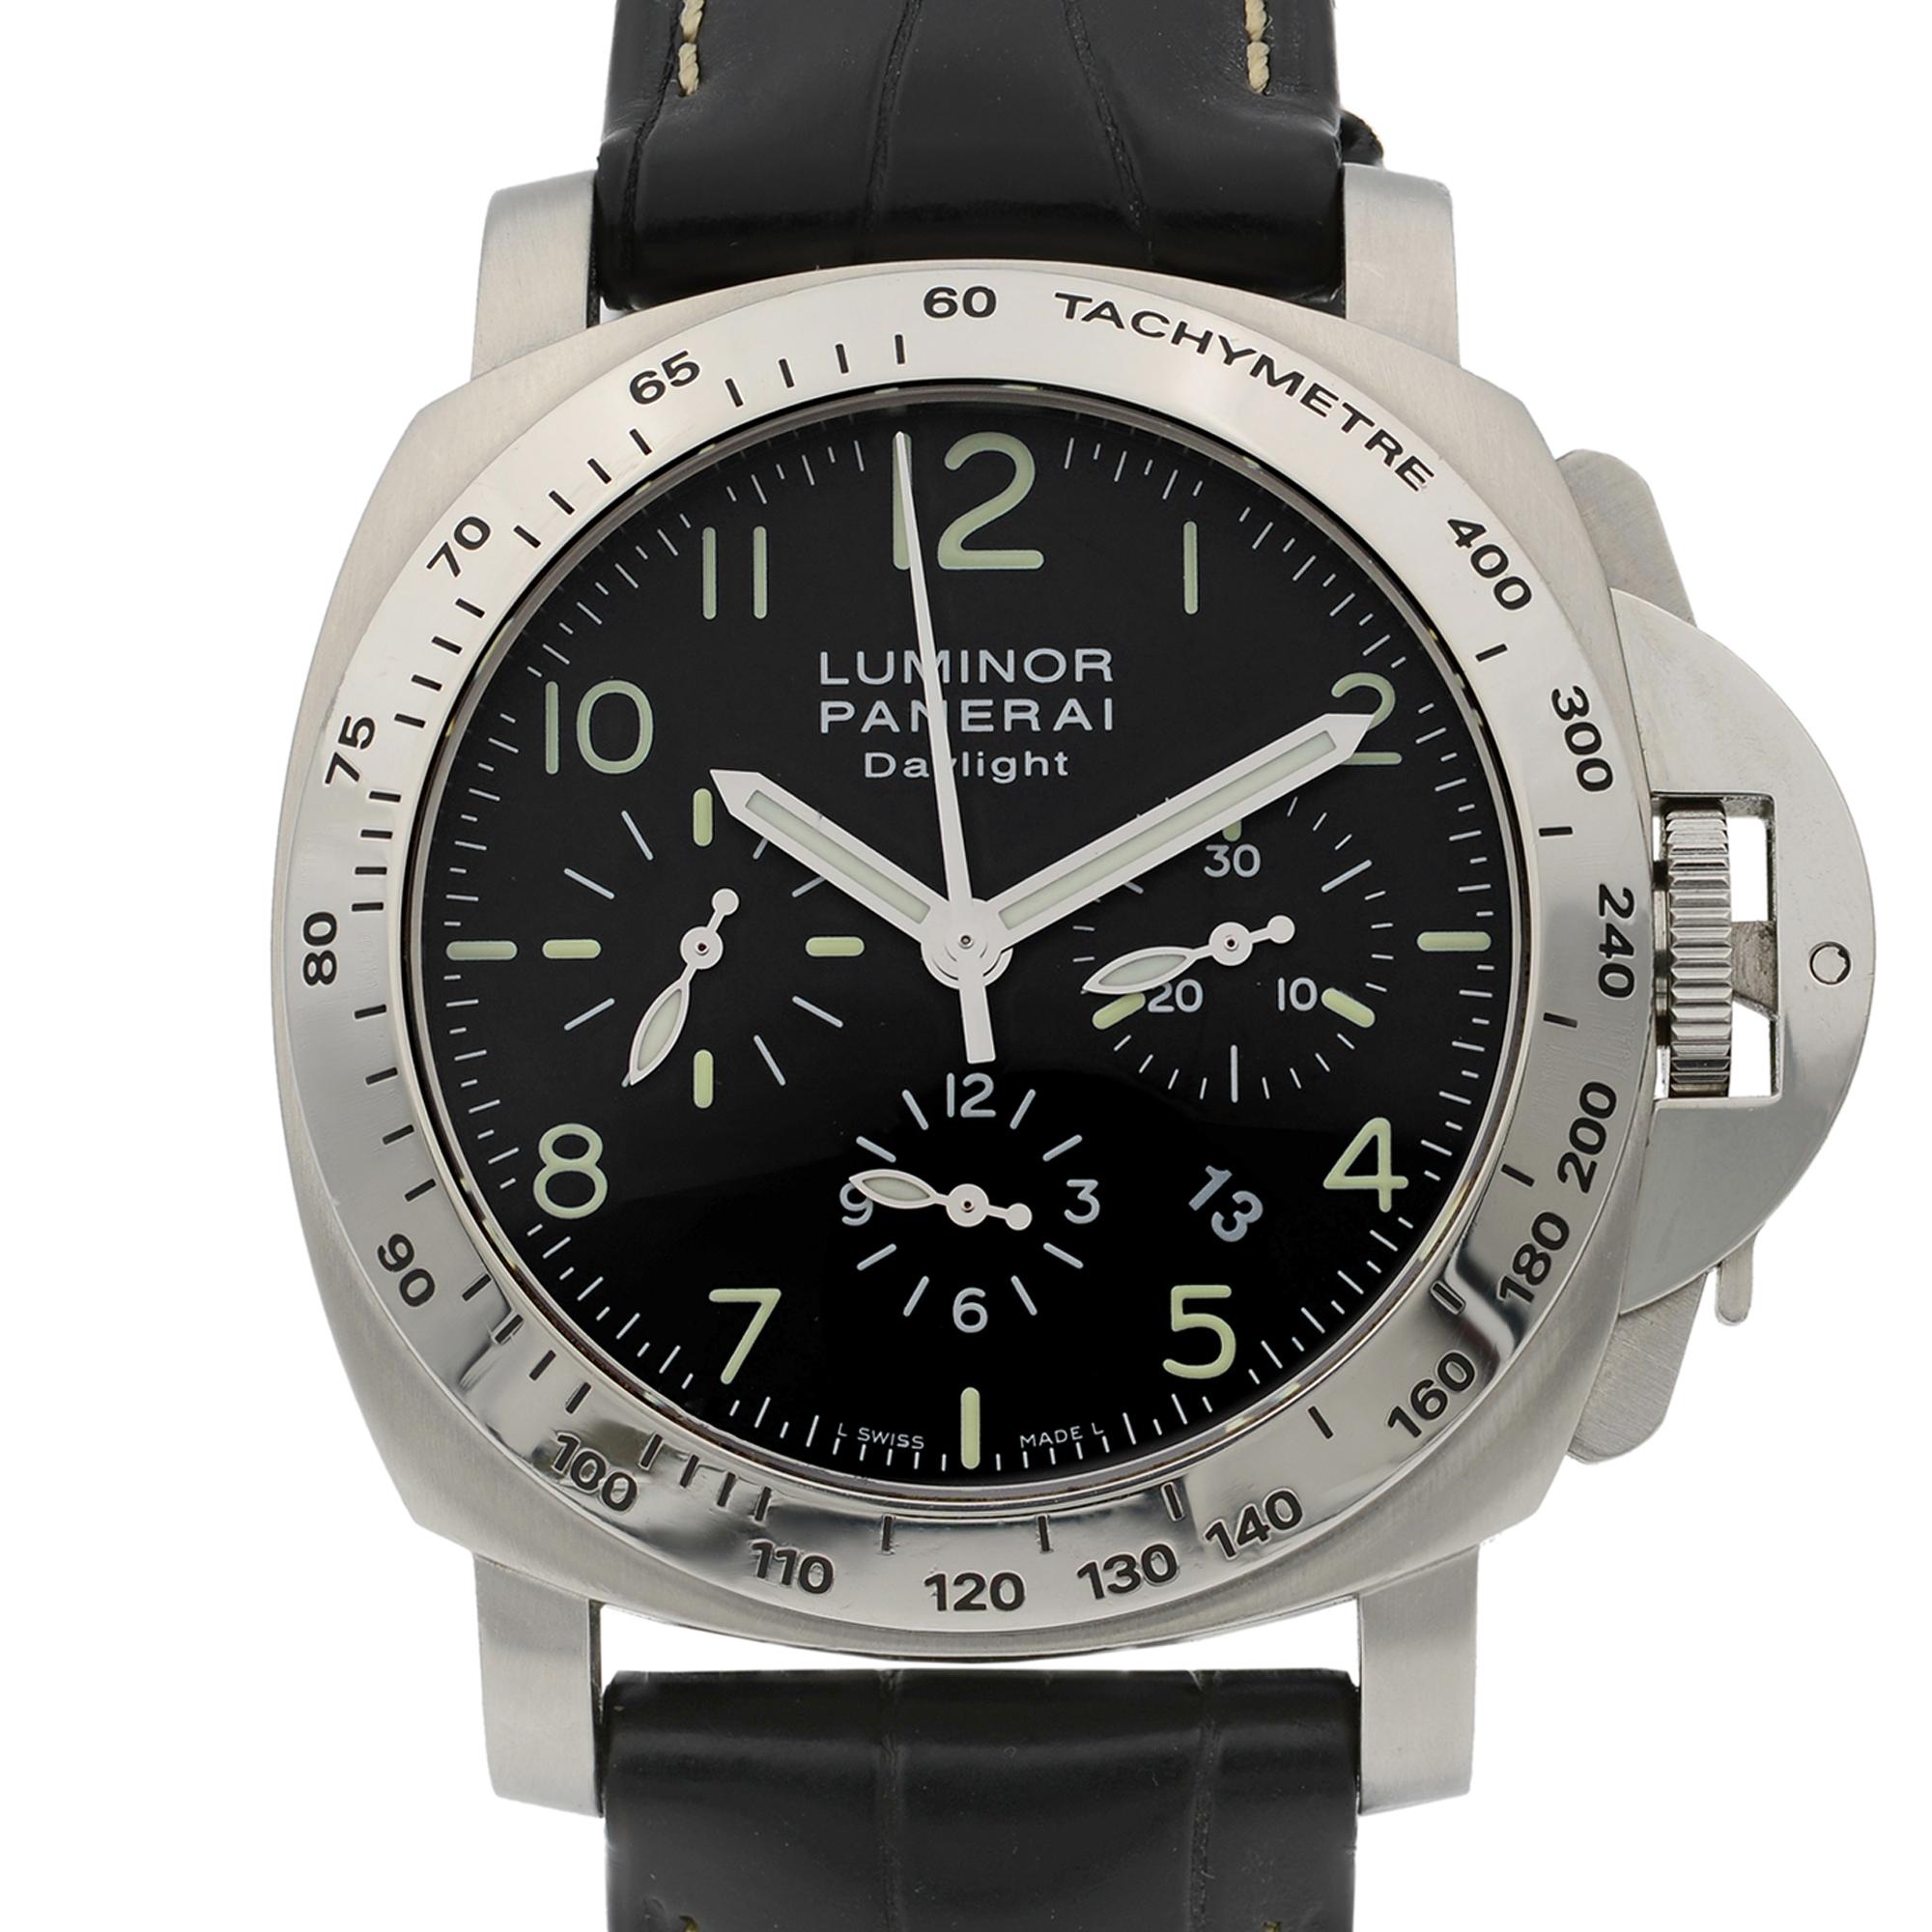 This pre-owned Panerai Luminor Pam00196 is a beautiful men's timepiece that is powered by a mechanical (automatic) movement which is cased in a stainless steel case. It has a tonneau shape face, chronograph, chronograph hand, date indicator, small